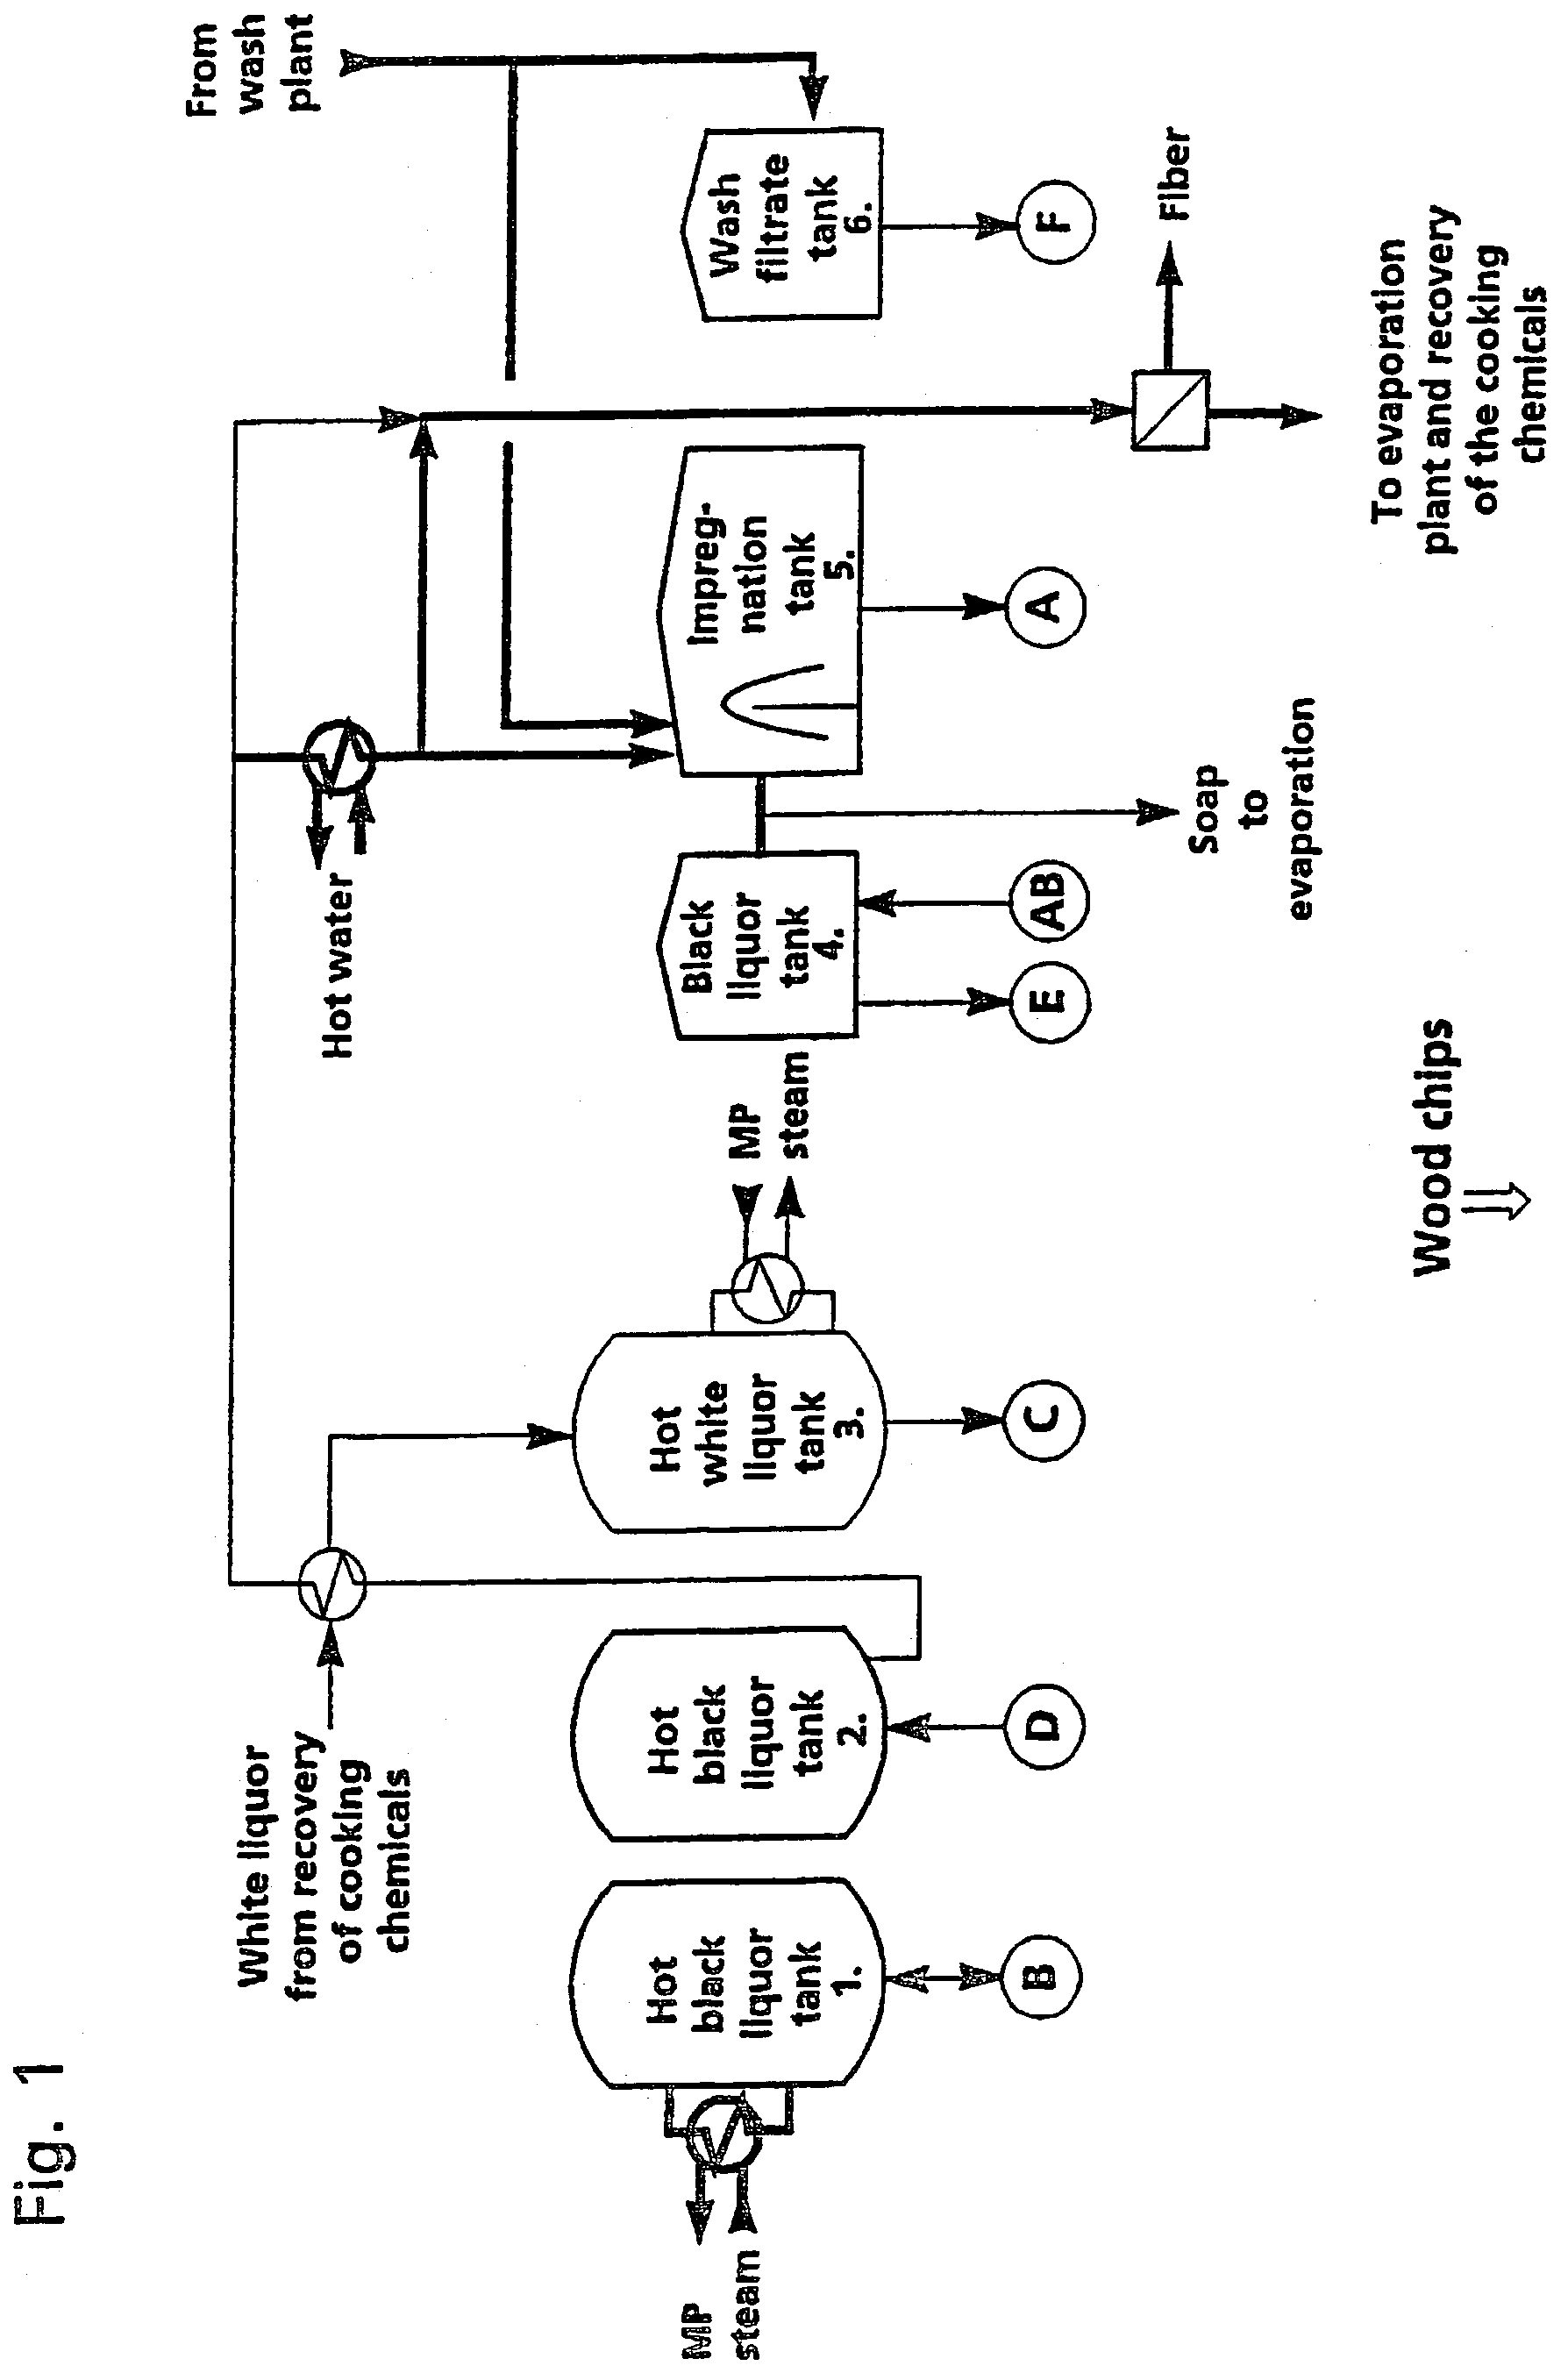 Method for improved turpentine recovery from modern cooking plants